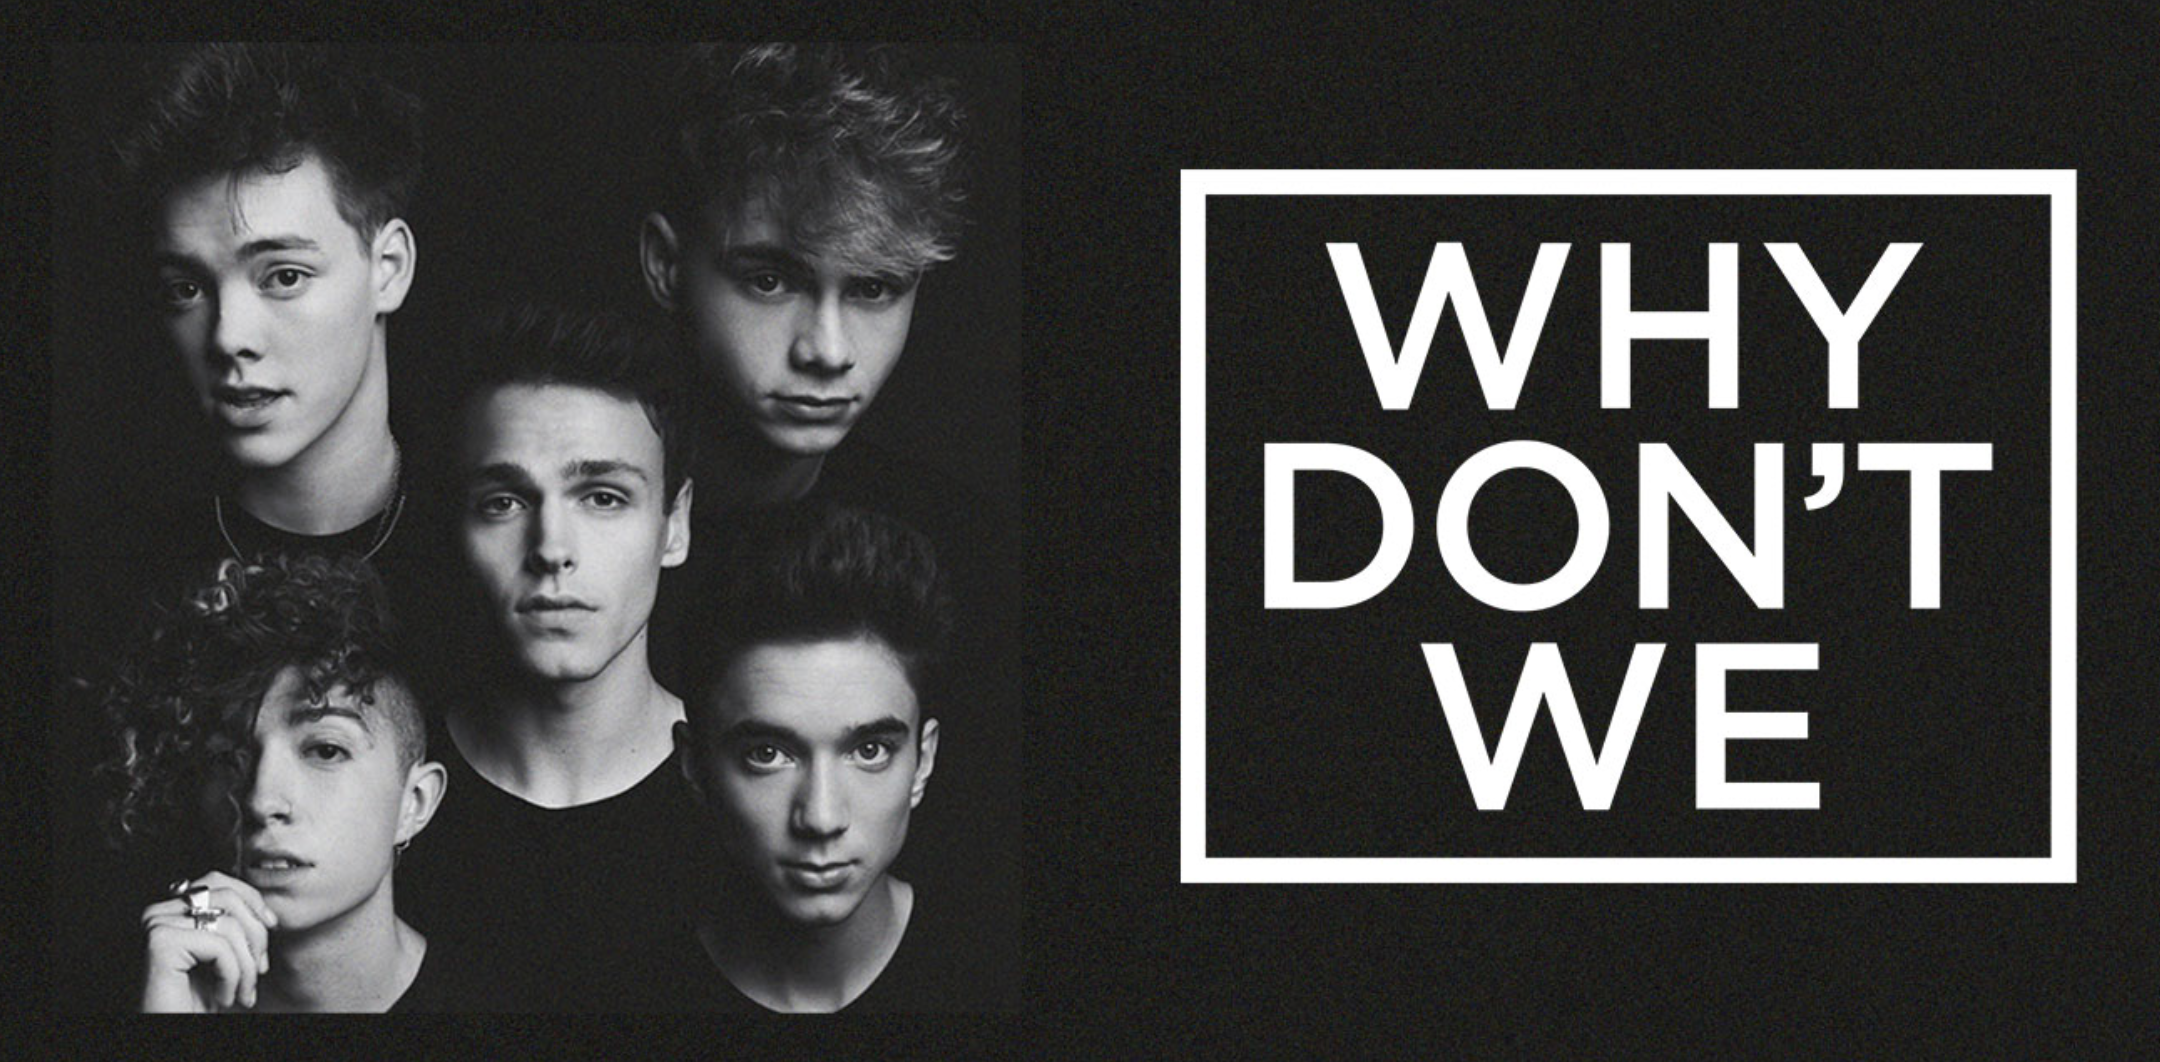 WHY DON’T WE